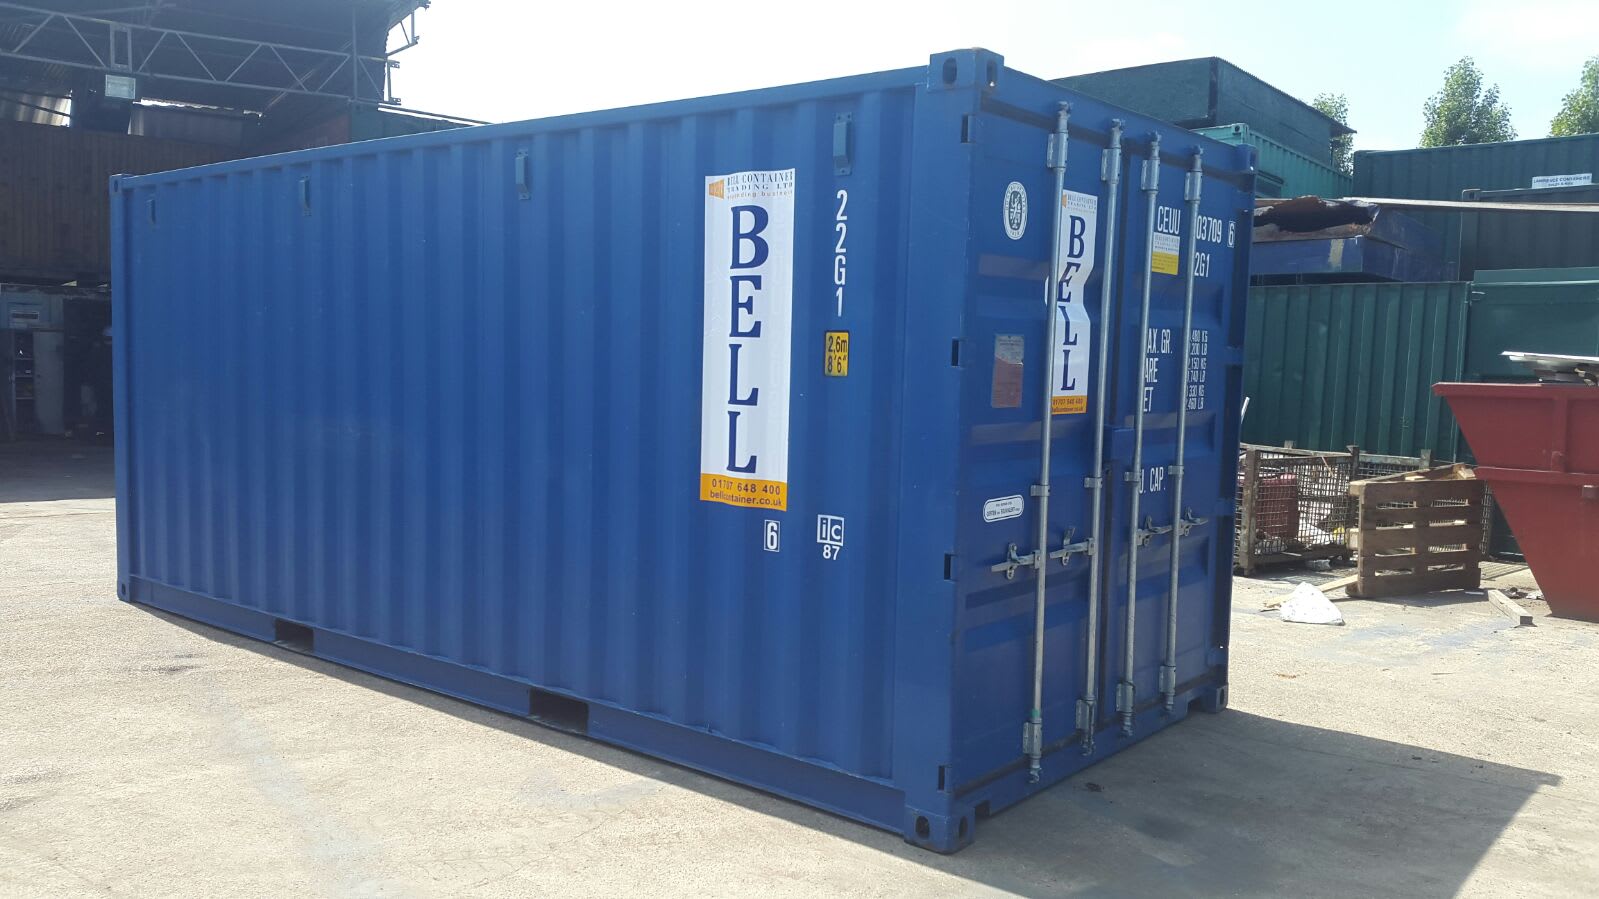 Bell Container Trading Ltd Potters Bar 01707 648400